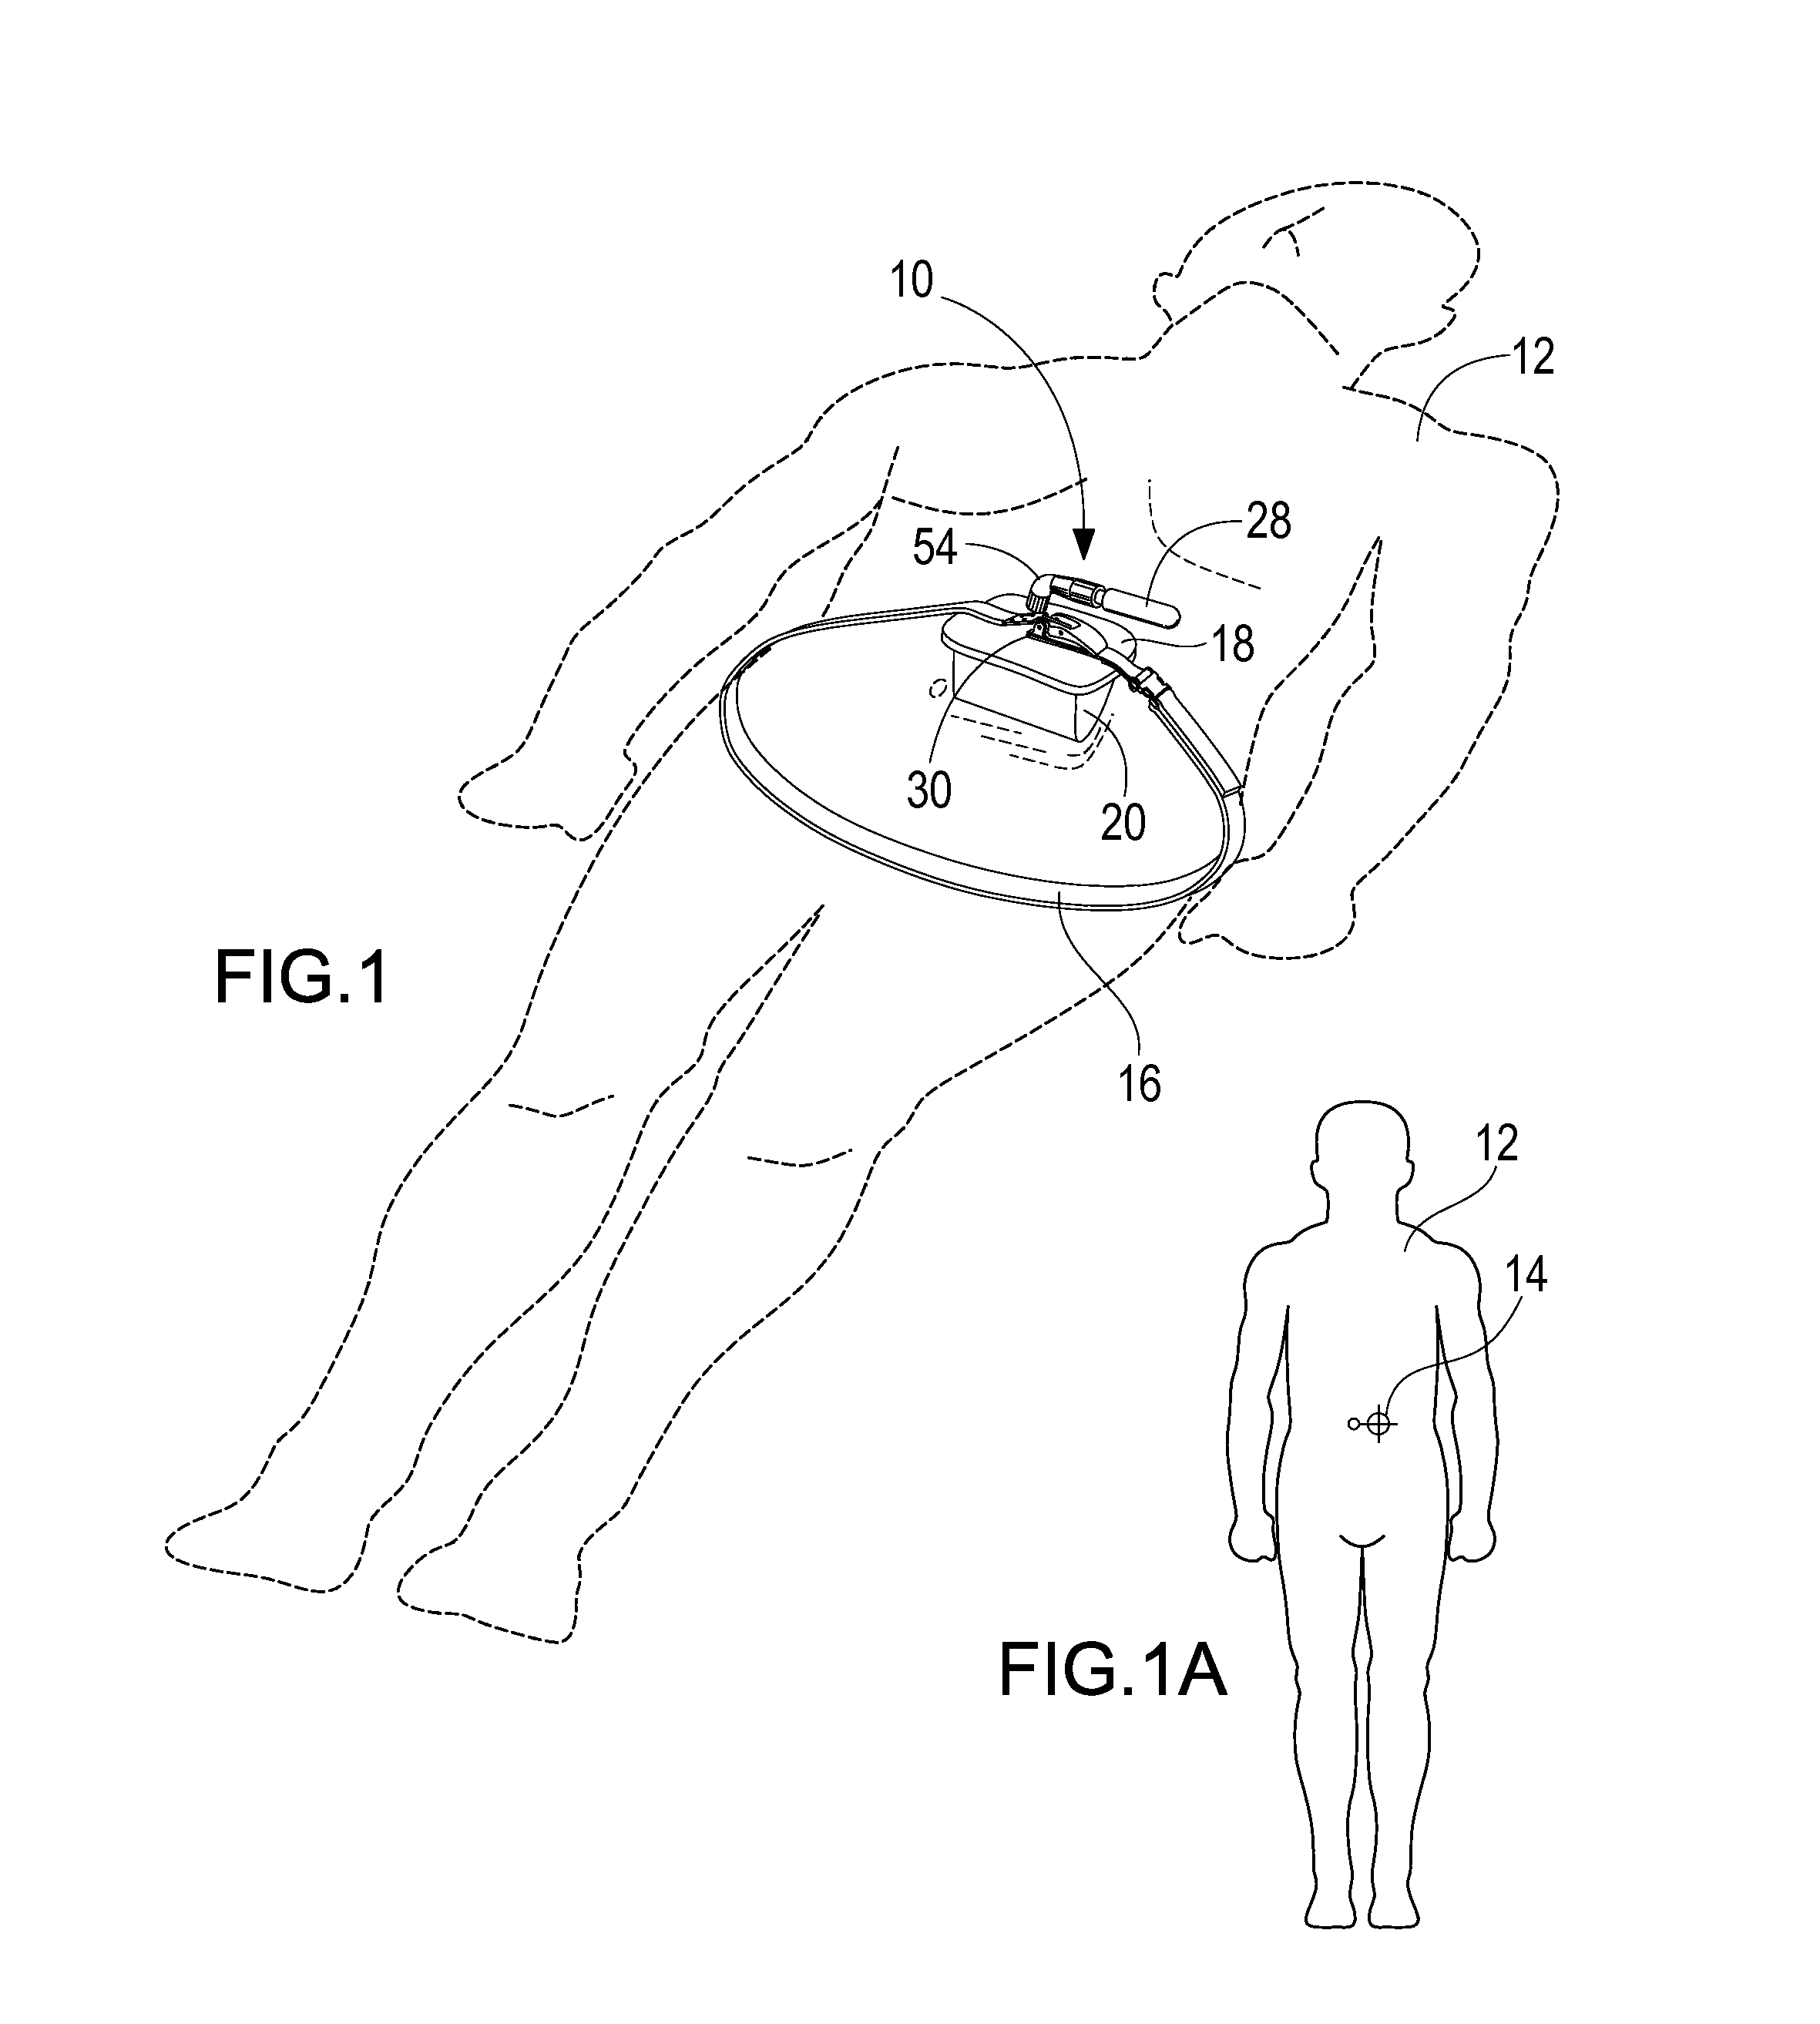 Portable pneumatic abdominal aortic tourniquet with supplemental tensioning means